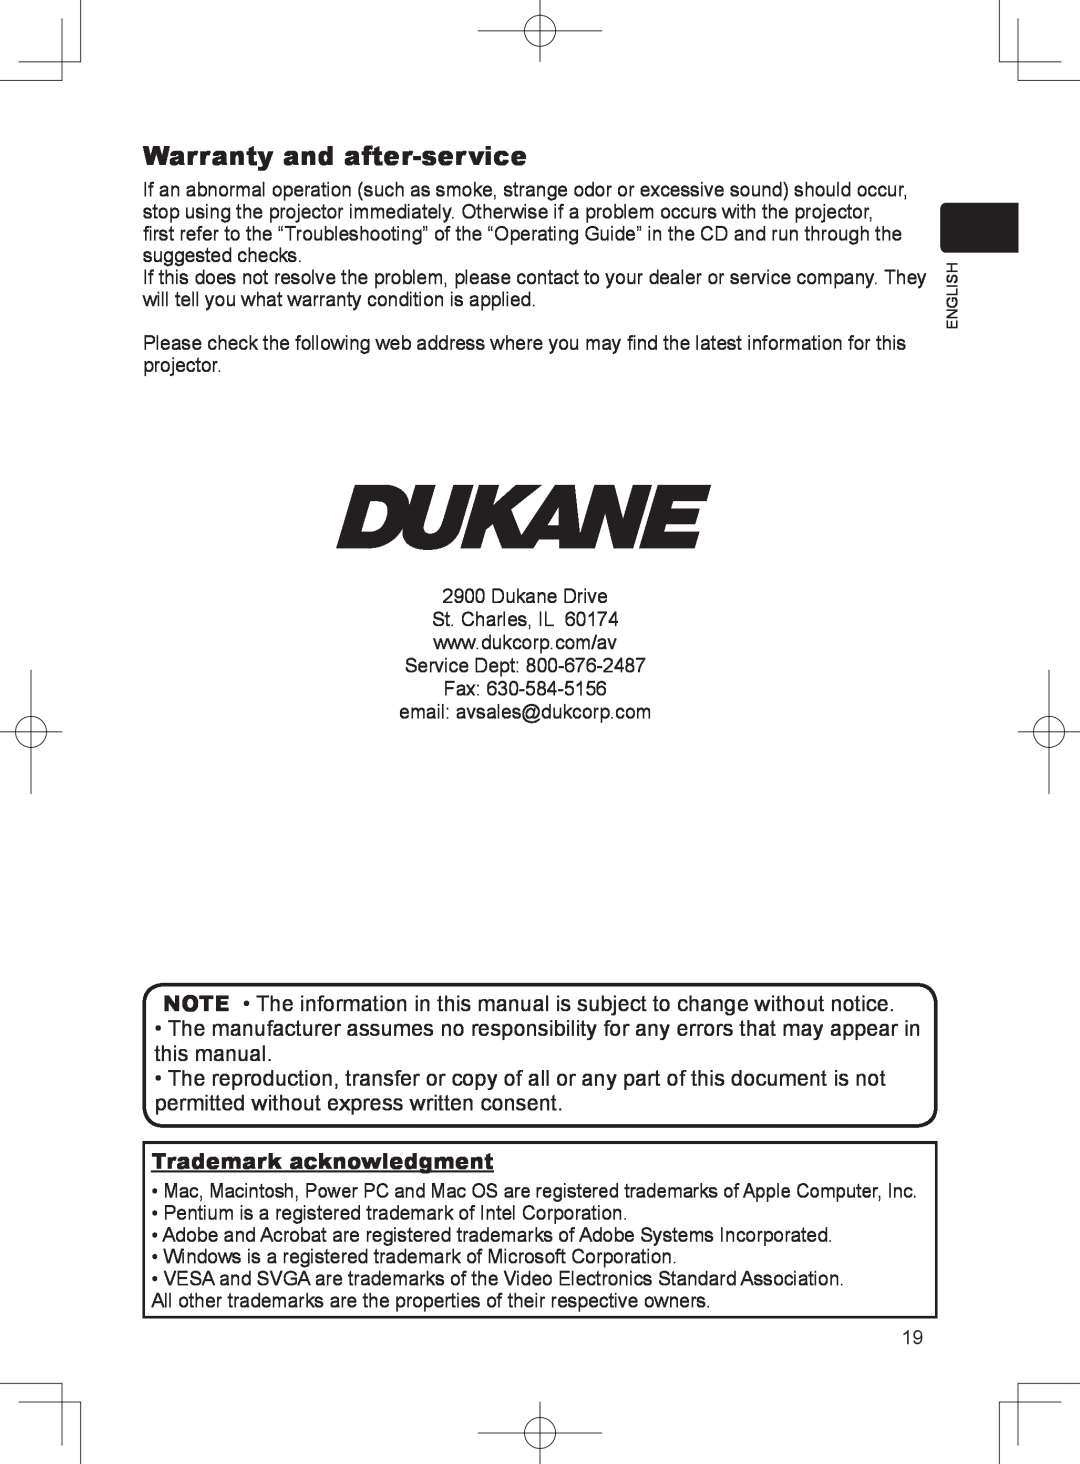 Dukane 8781 user manual Warranty and after-service, Trademark acknowledgment 